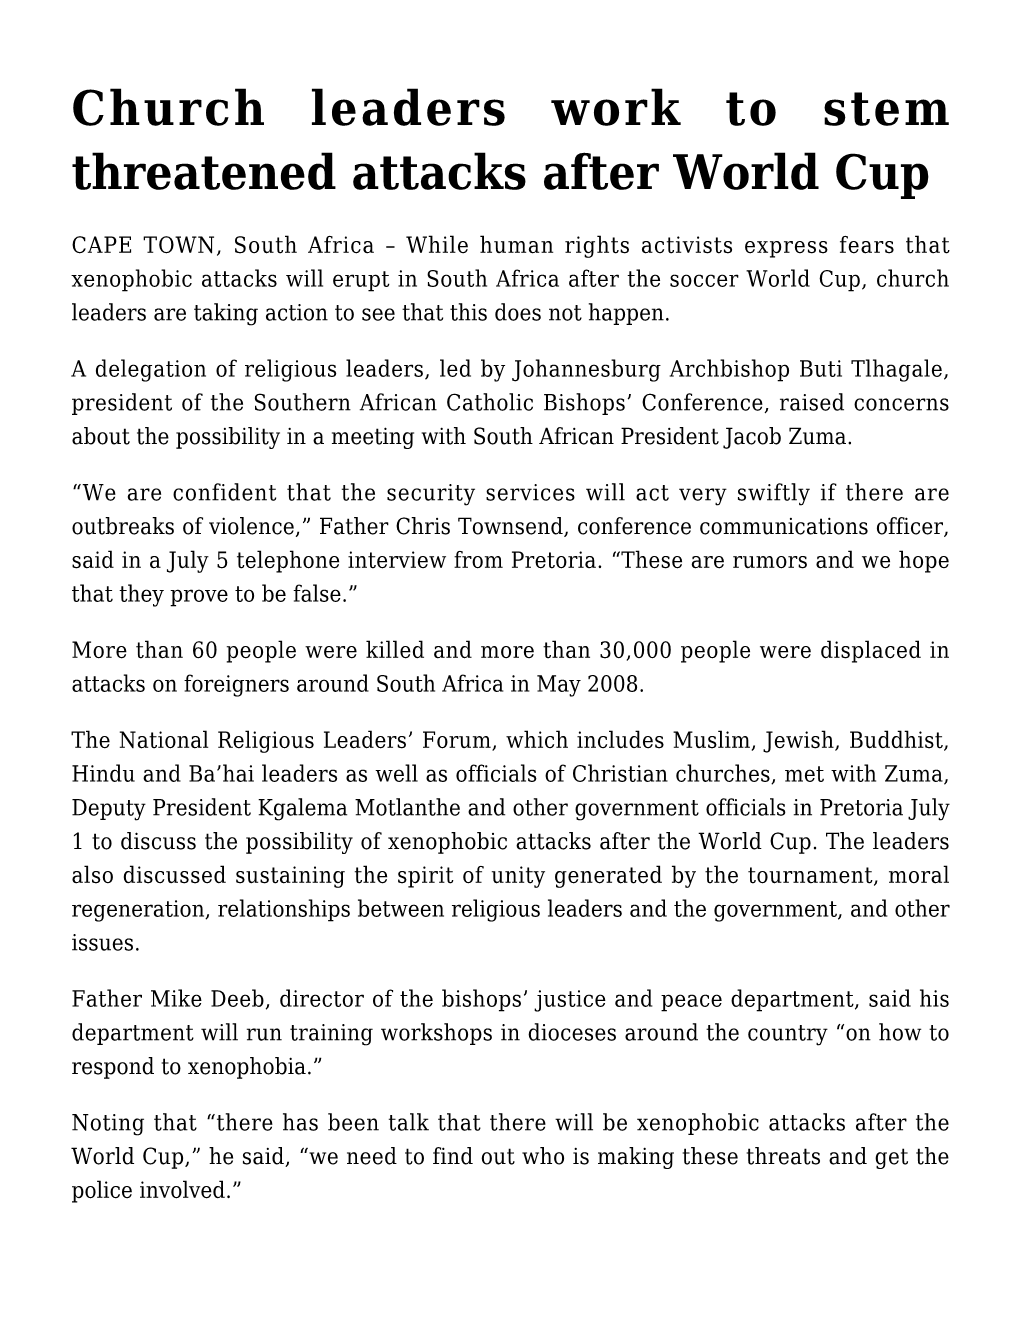 Church Leaders Work to Stem Threatened Attacks After World Cup